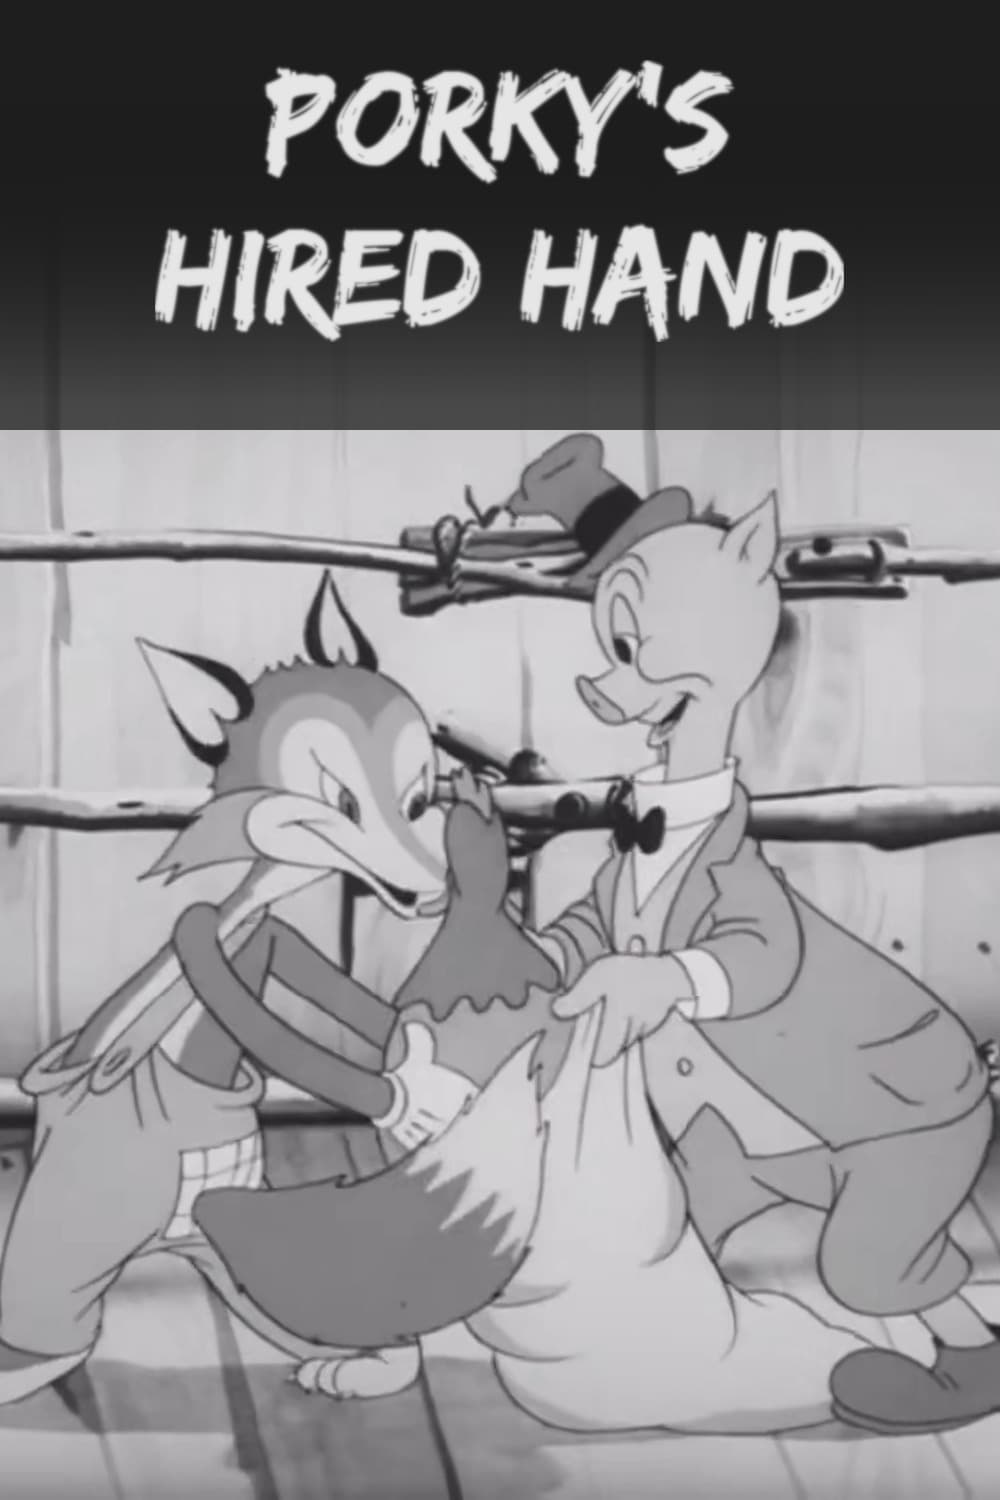 Porky's Hired Hand (1940)